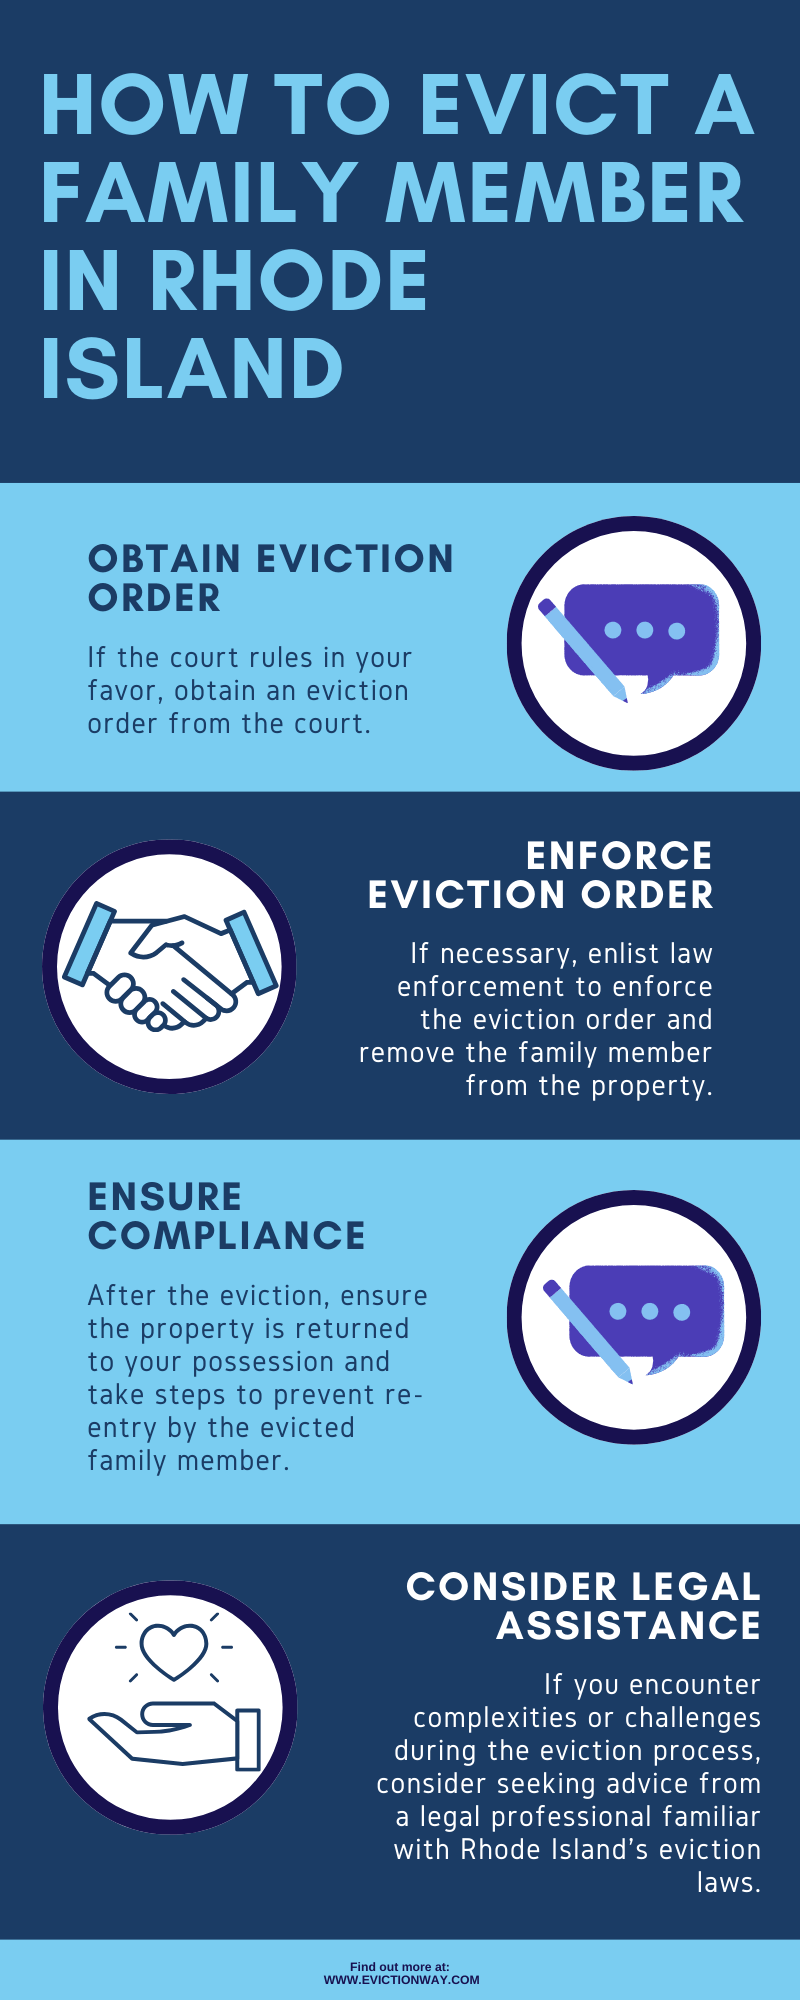 How to Evict a Family Member in Rhode Island